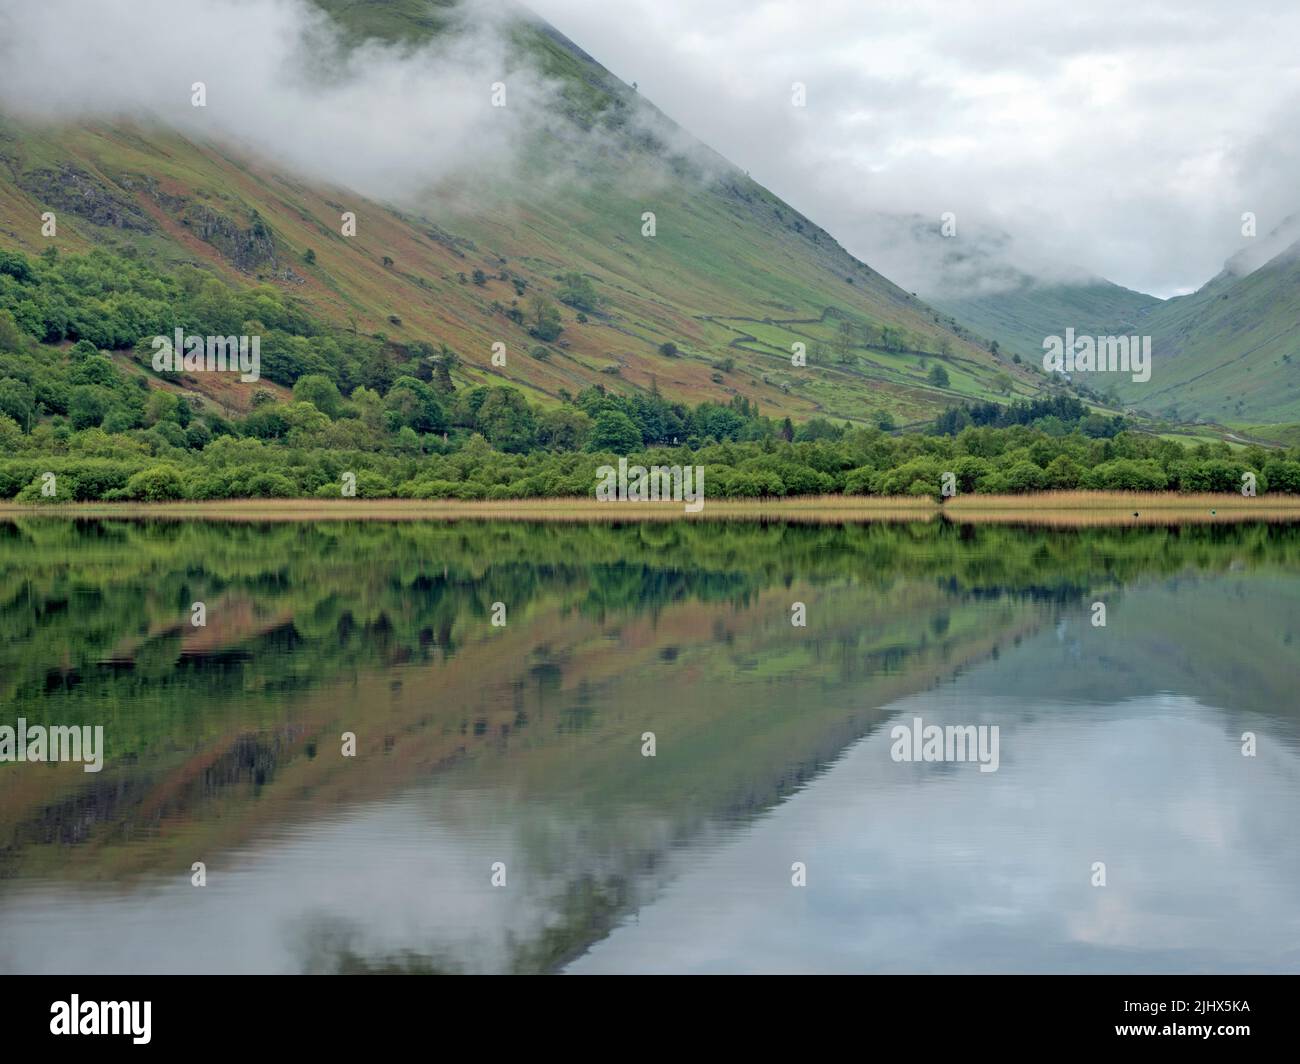 View across Brotherswater lake on a misty morning with Kirkstone Pass in the background, Cumbria, England Stock Photo